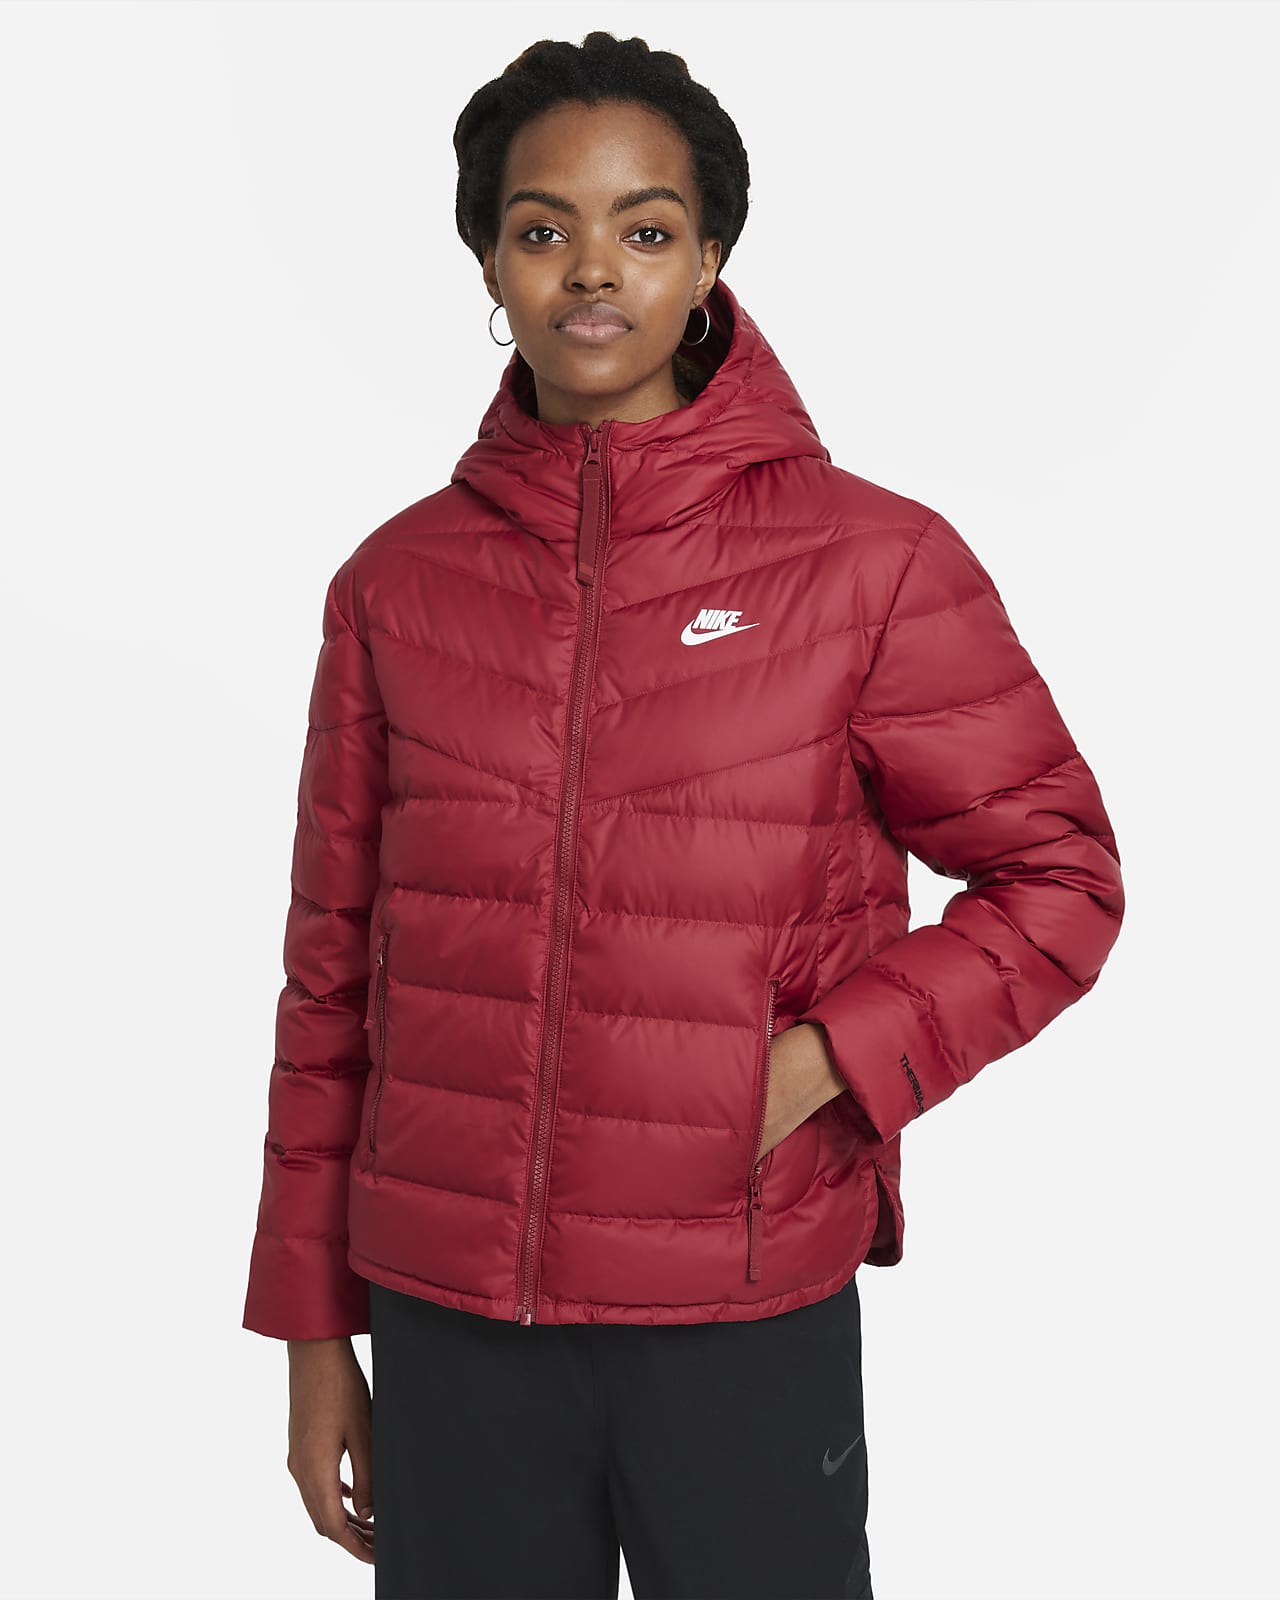 Betsy Trotwood Boil labyrinth Chamarra para mujer Nike Sportswear Therma-FIT Repel Windrunner. Nike.com